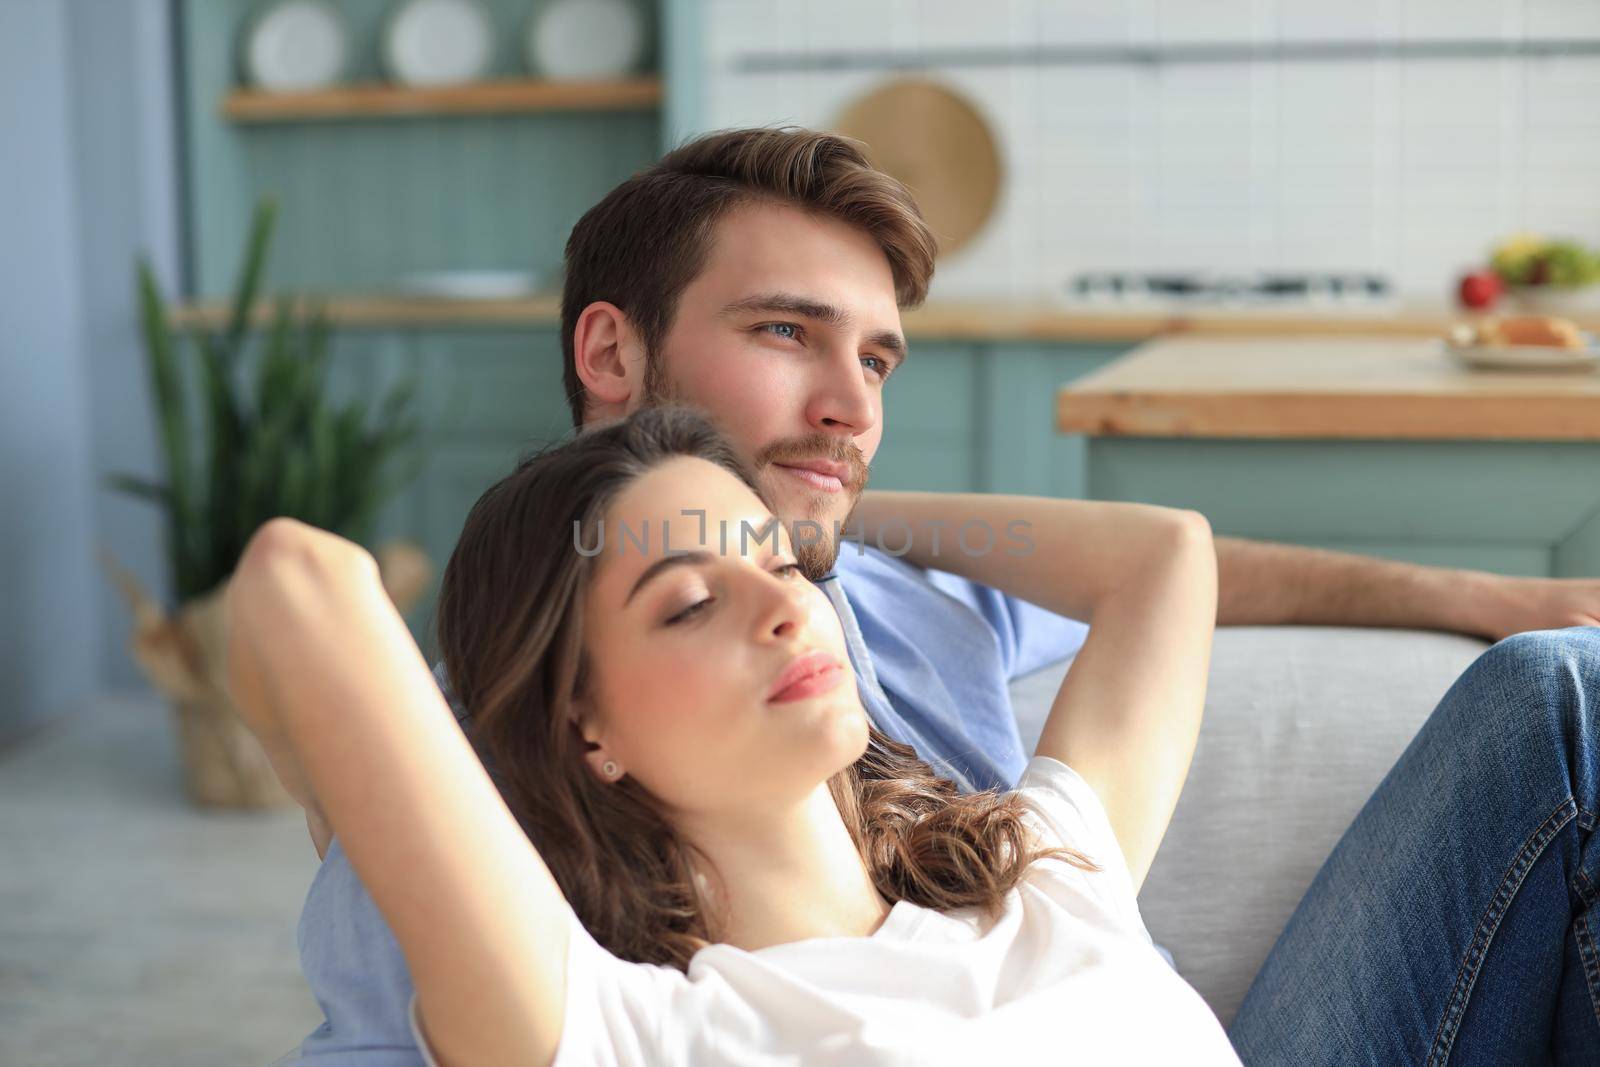 Portrait of cute young couple sitting in sofa